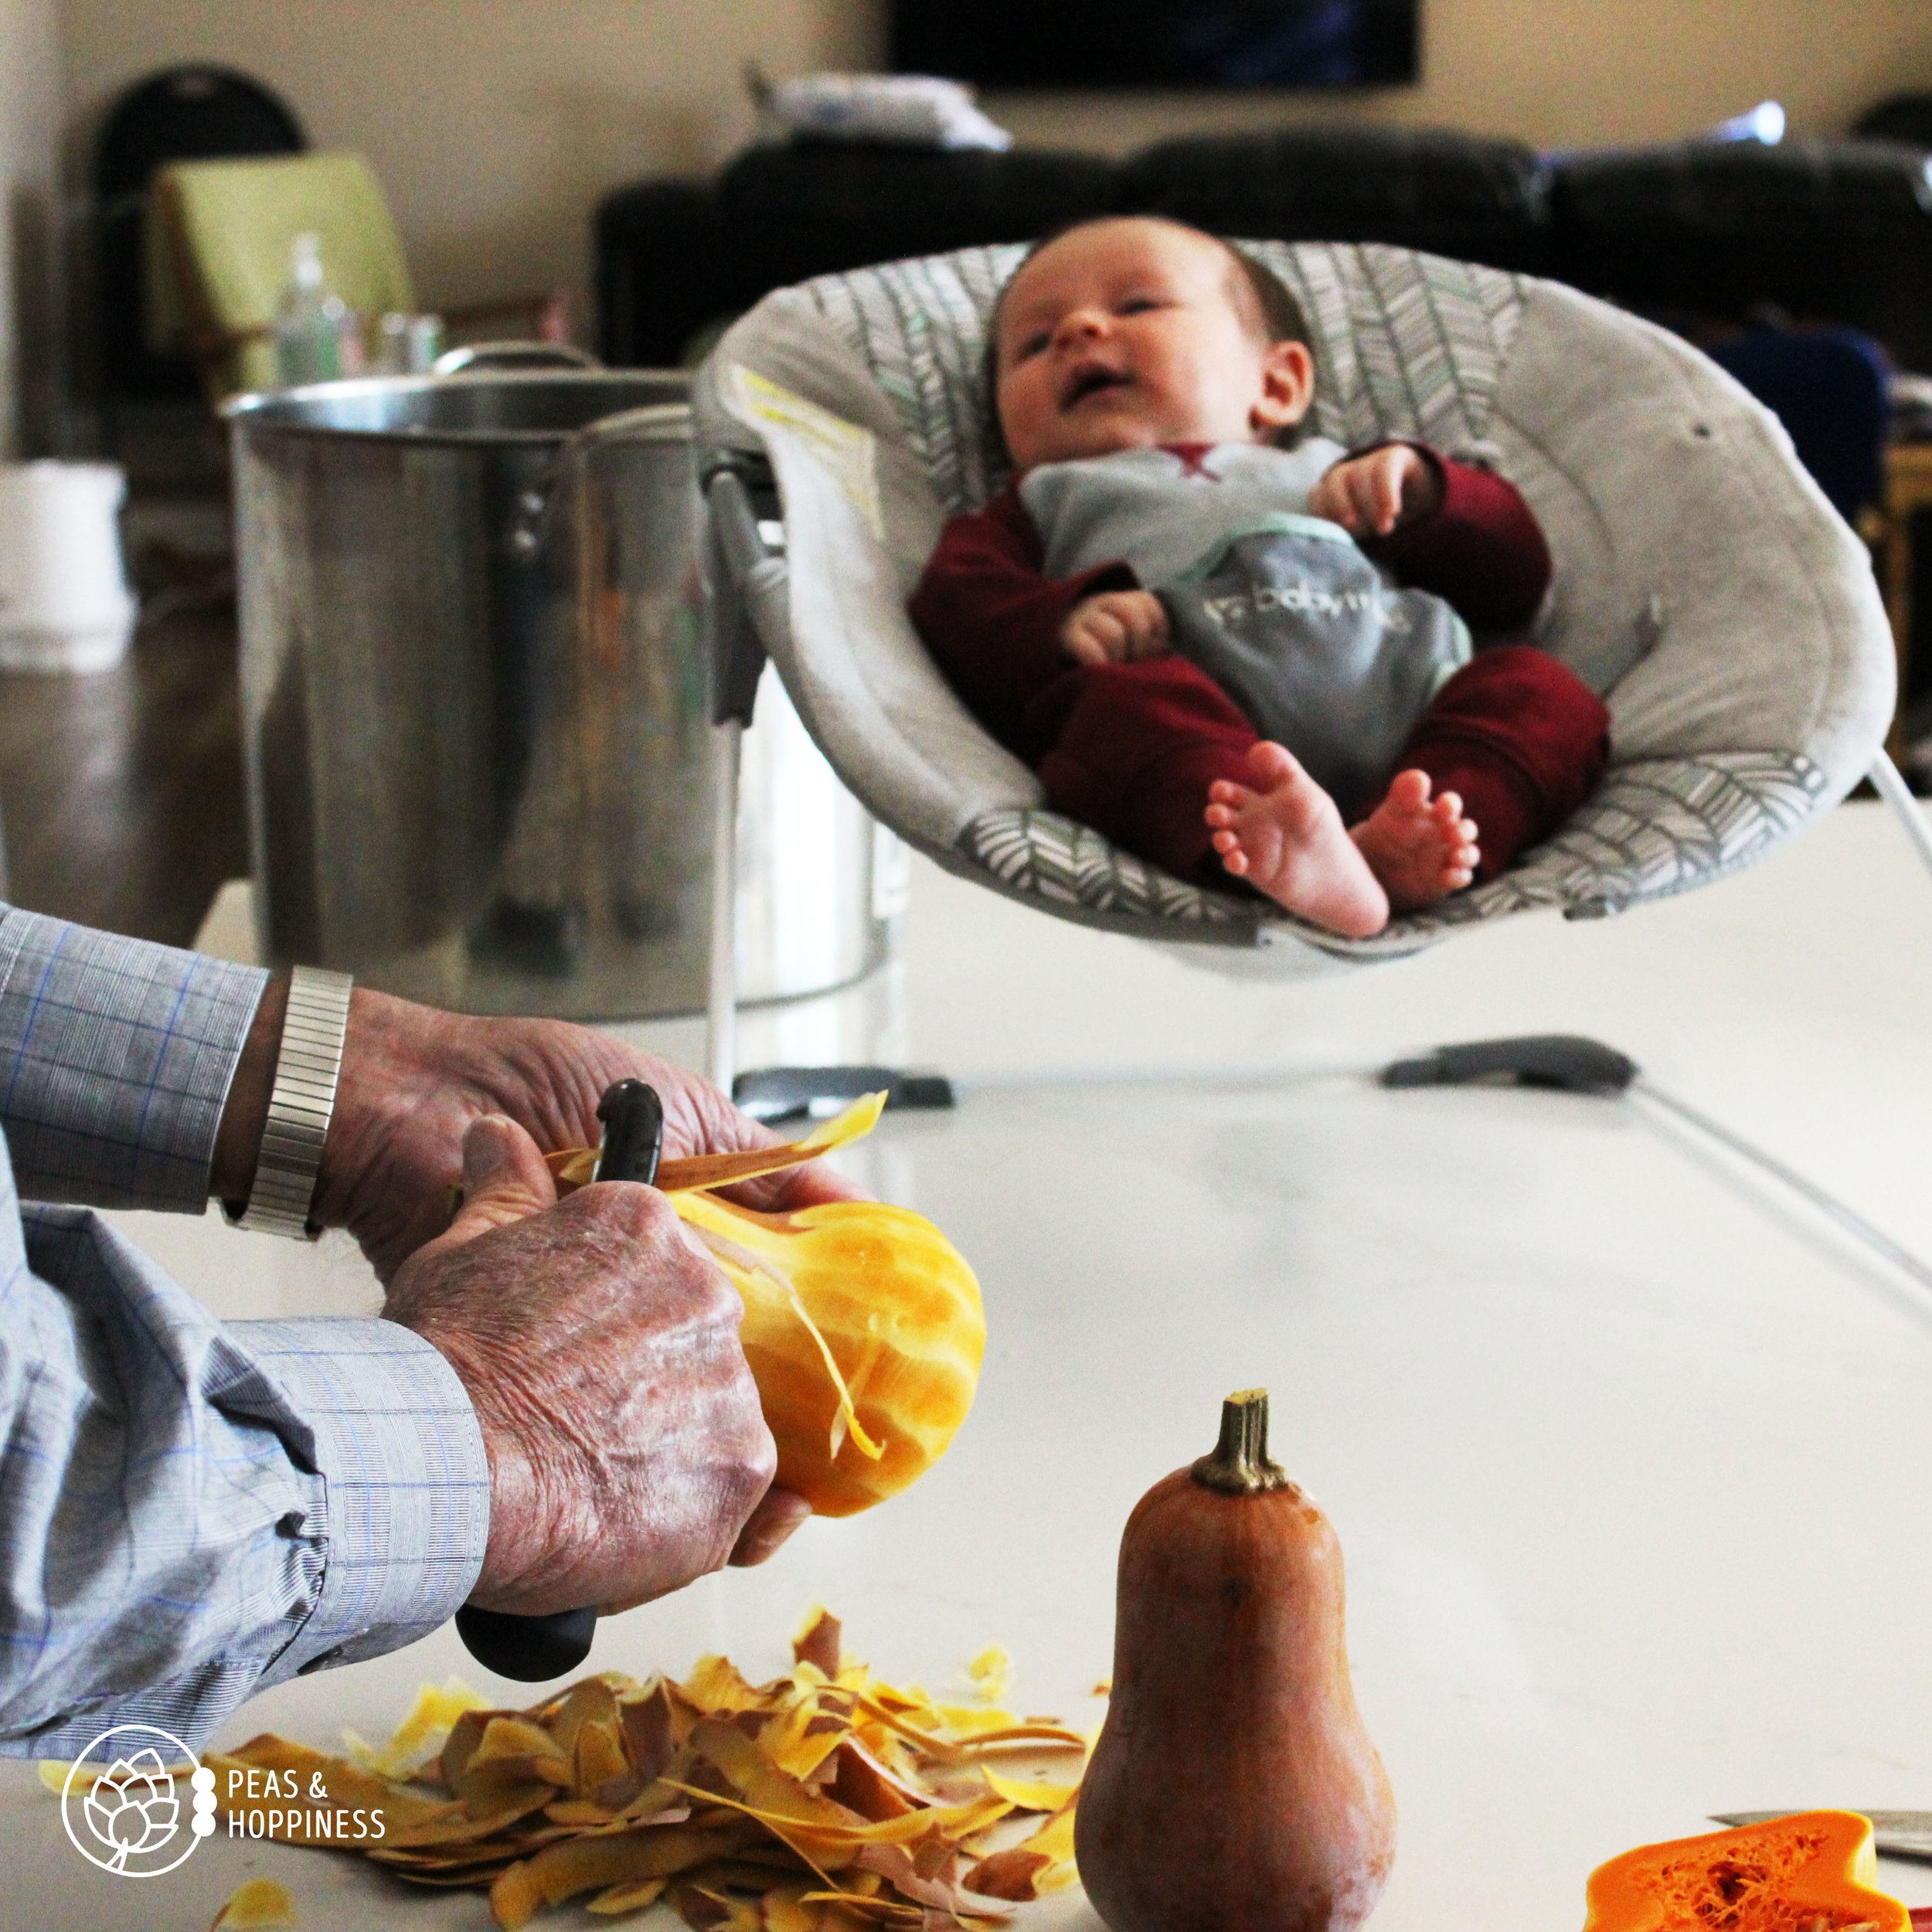 Hands peeling a butternut squash in the foreground with a baby in an infant seat sitting on the counter in the background